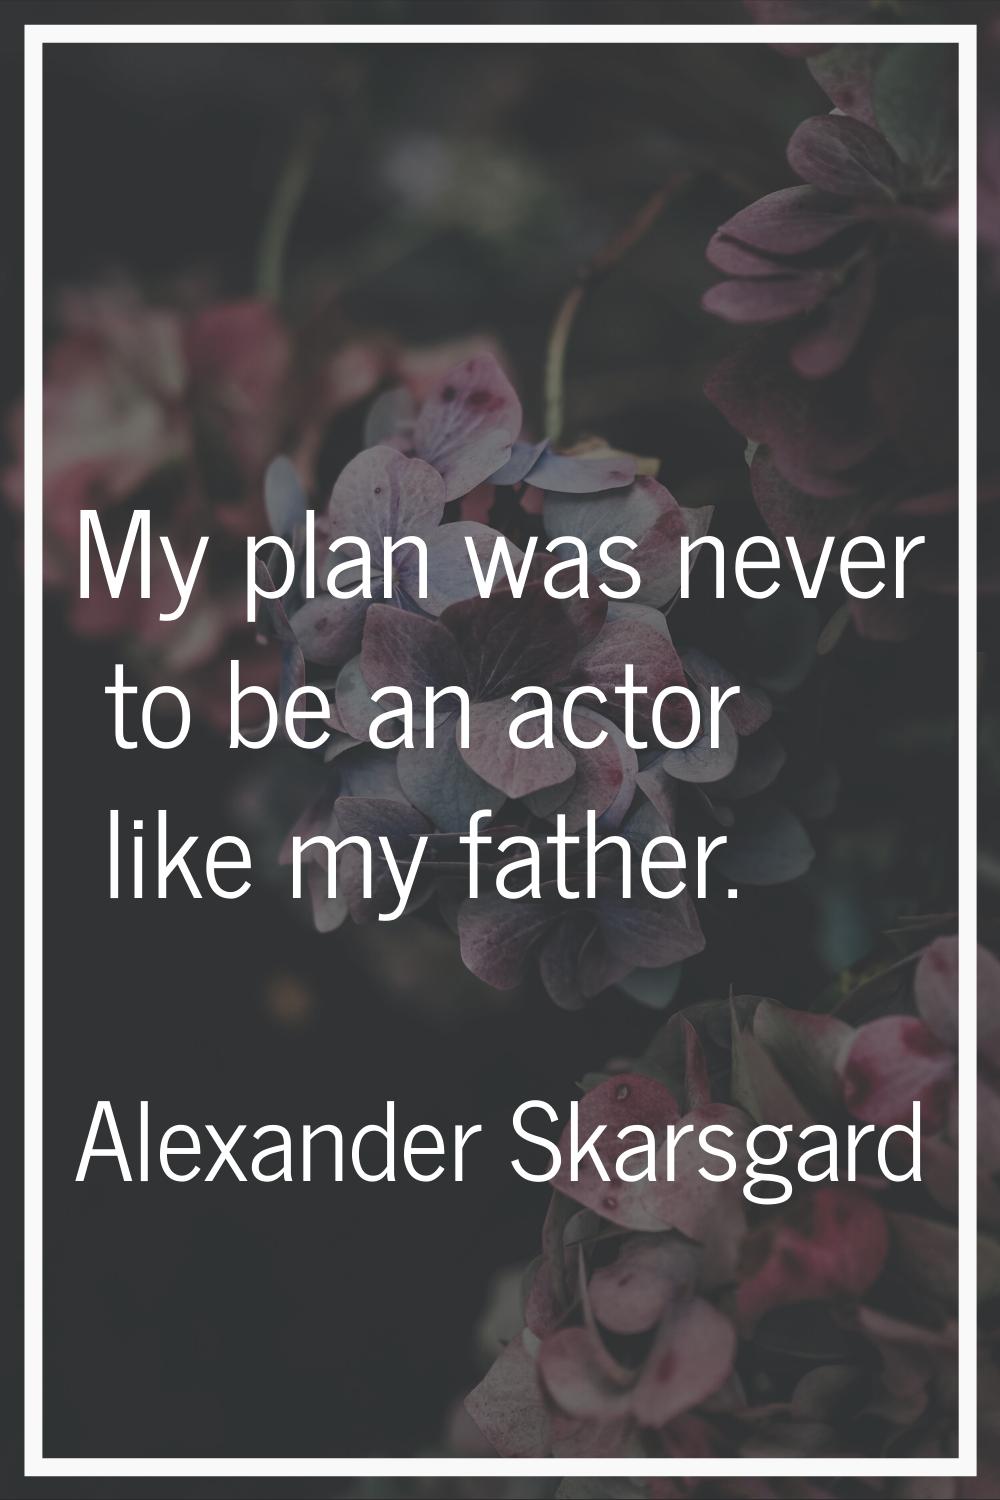 My plan was never to be an actor like my father.